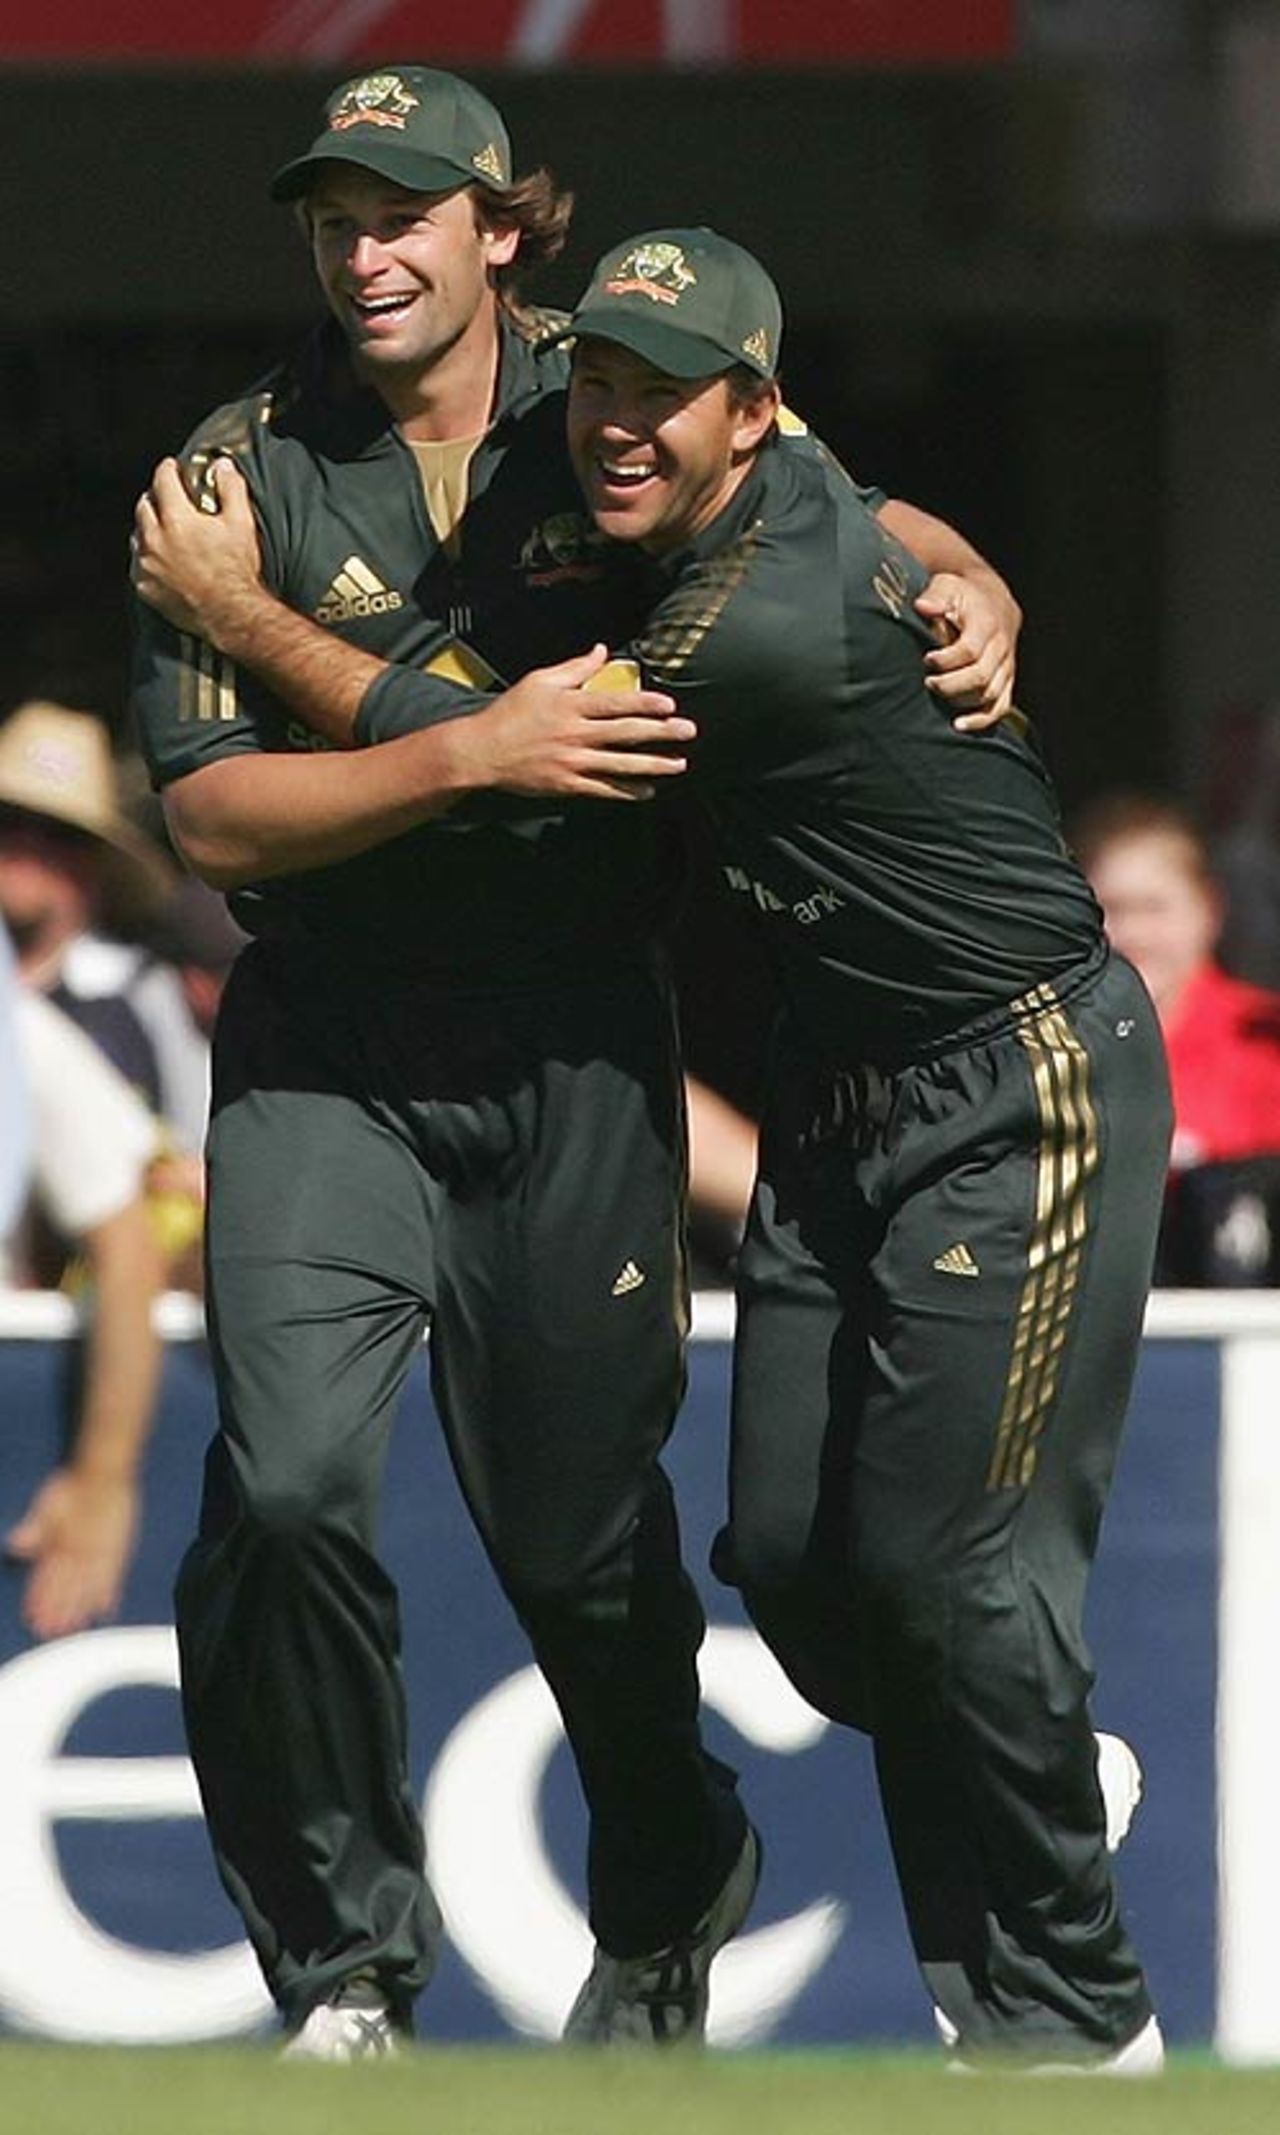 Ricky Ponting congratulates the debutant Ben Hilfenhaus on taking the catch to win the game, Australia v New Zealand, CB Series, 2nd match, Hobart, January 14, 2007